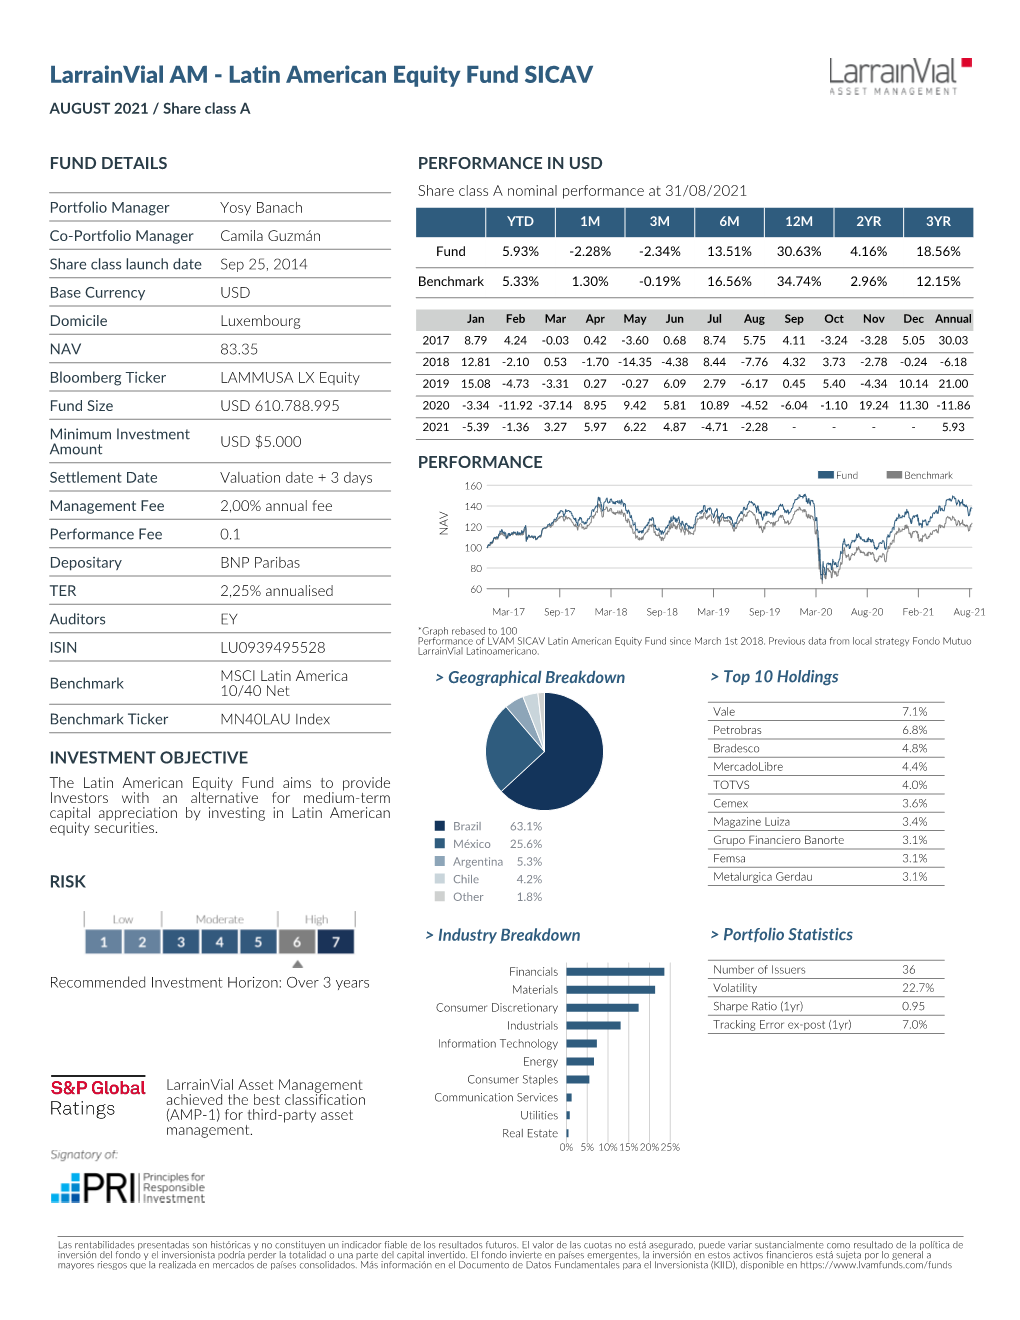 Larrainvial AM - Latin American Equity Fund SICAV AUGUST 2021 / Share Class A